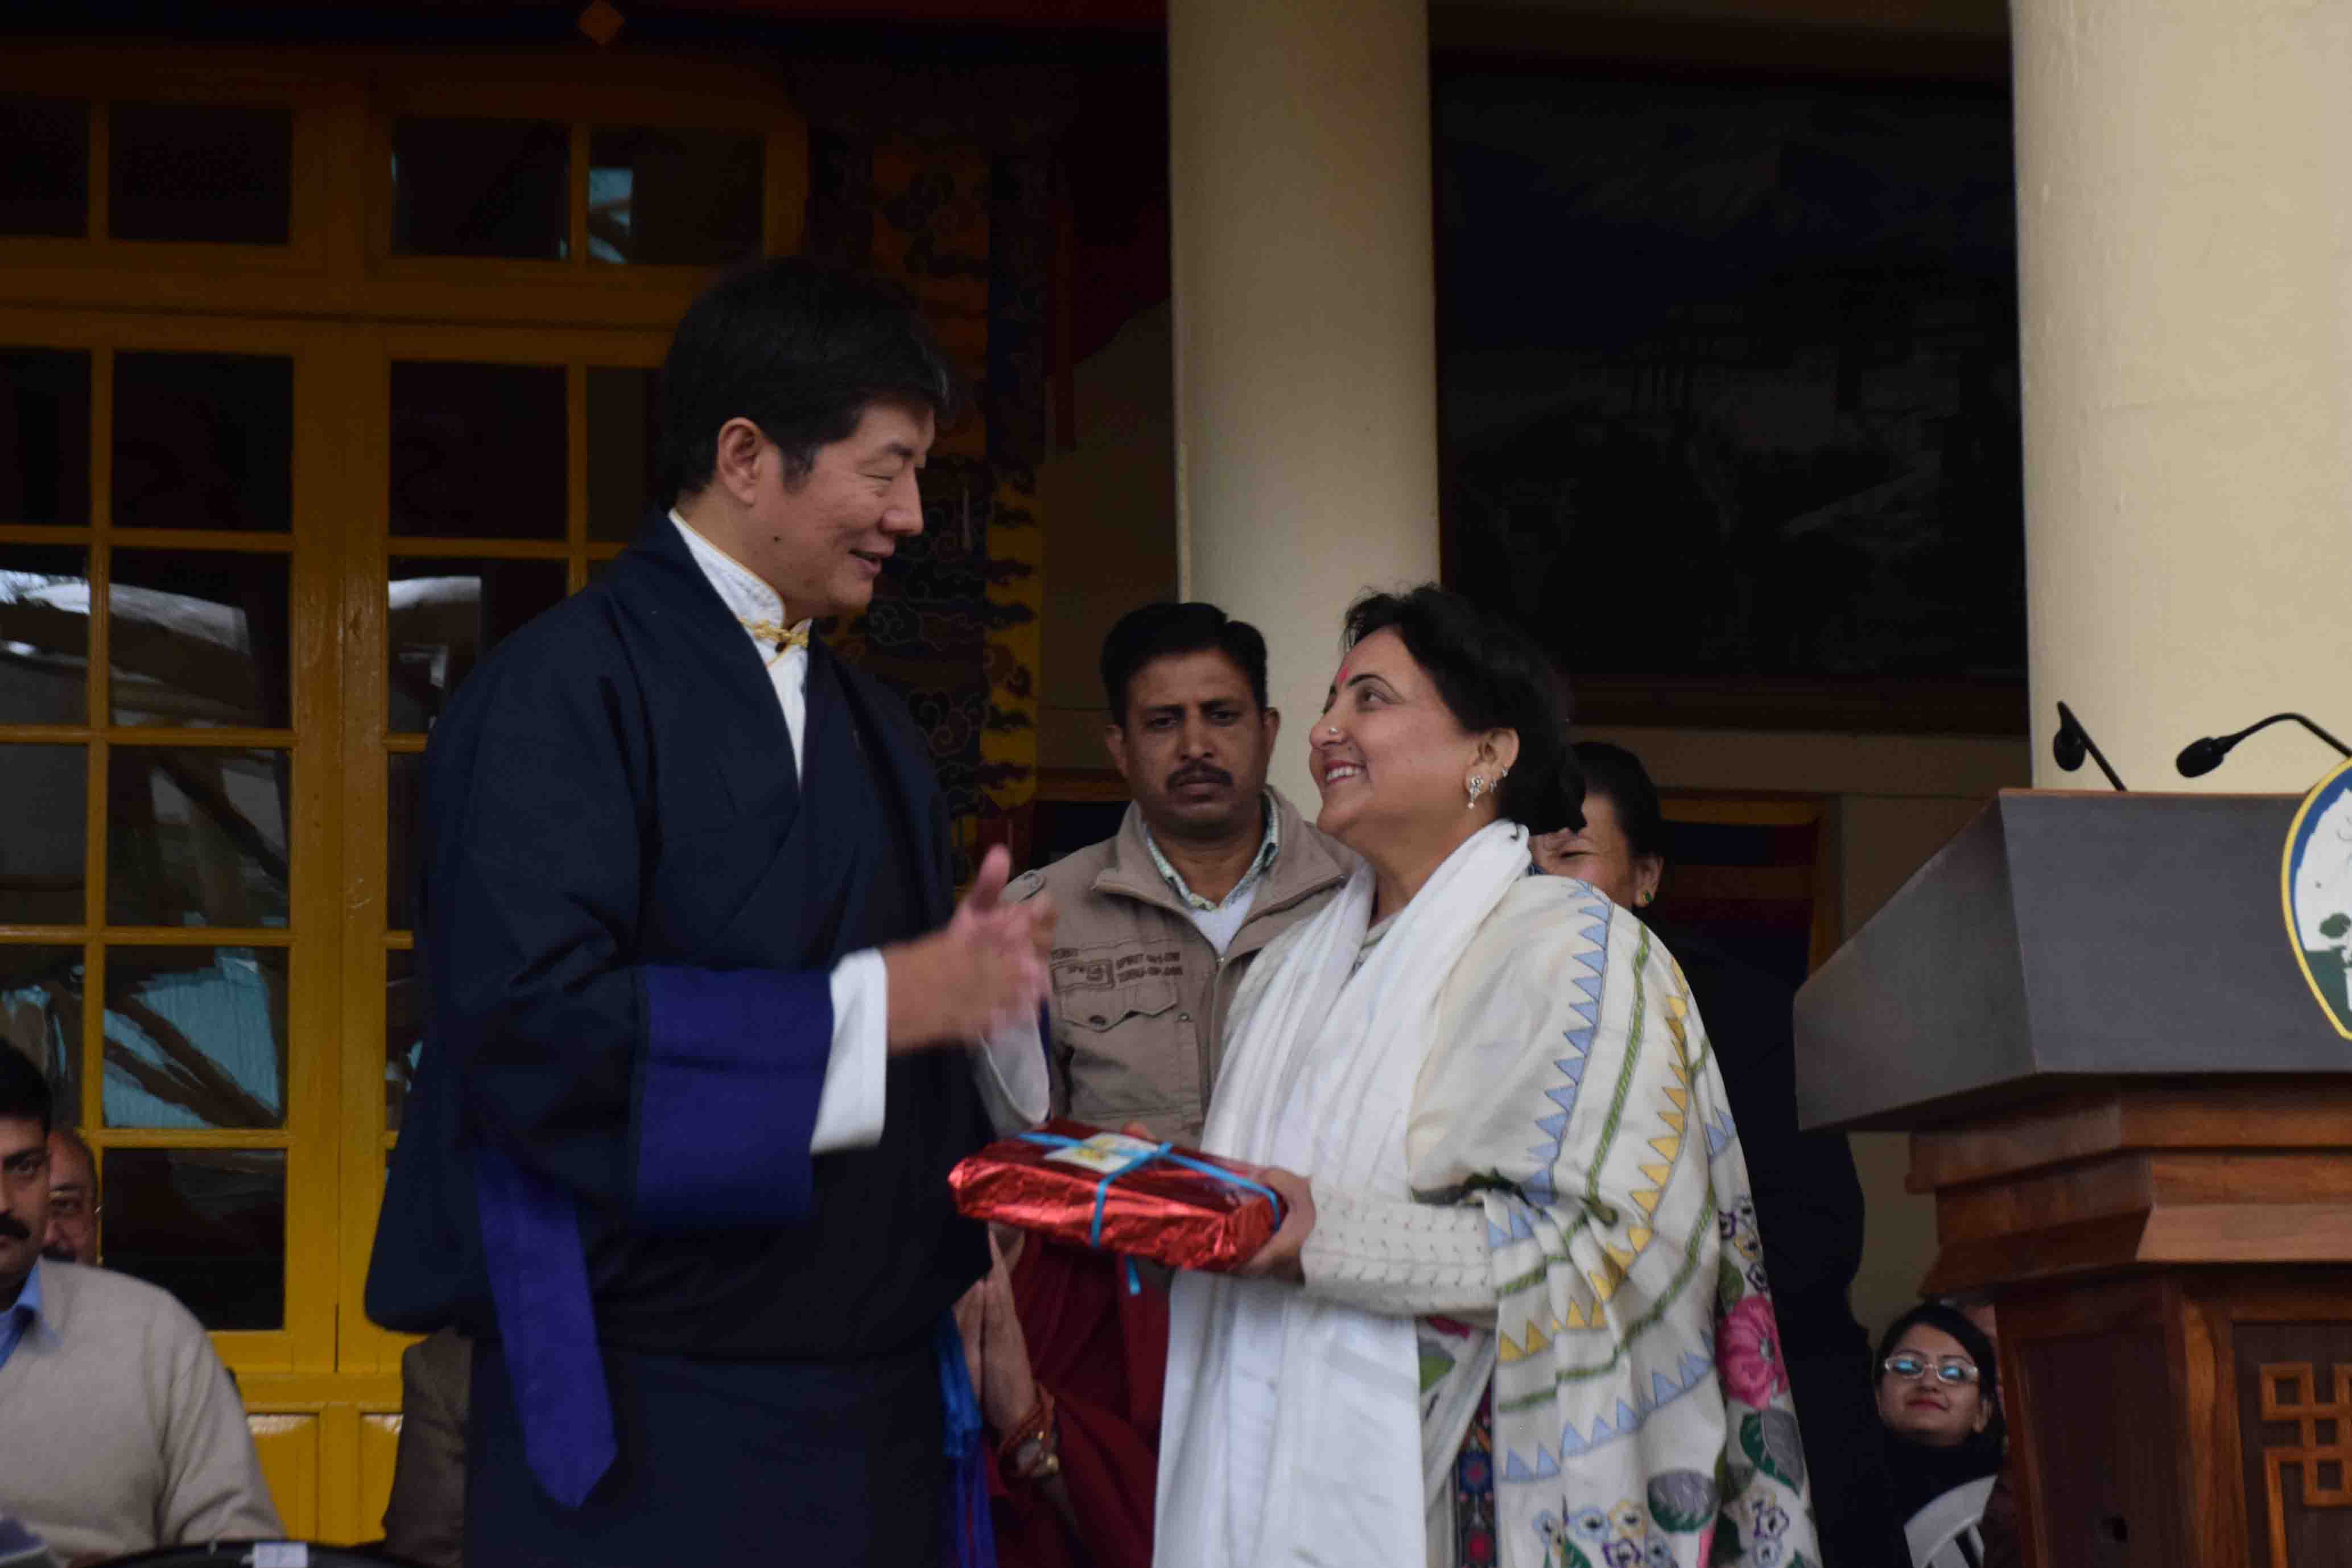 Sikyong Dr. Lobsang Sangay with the Chief Guest Shmt. Sarveen Chaudhary, MLA from Shahpur. (Photo courtesy: tibet.net)